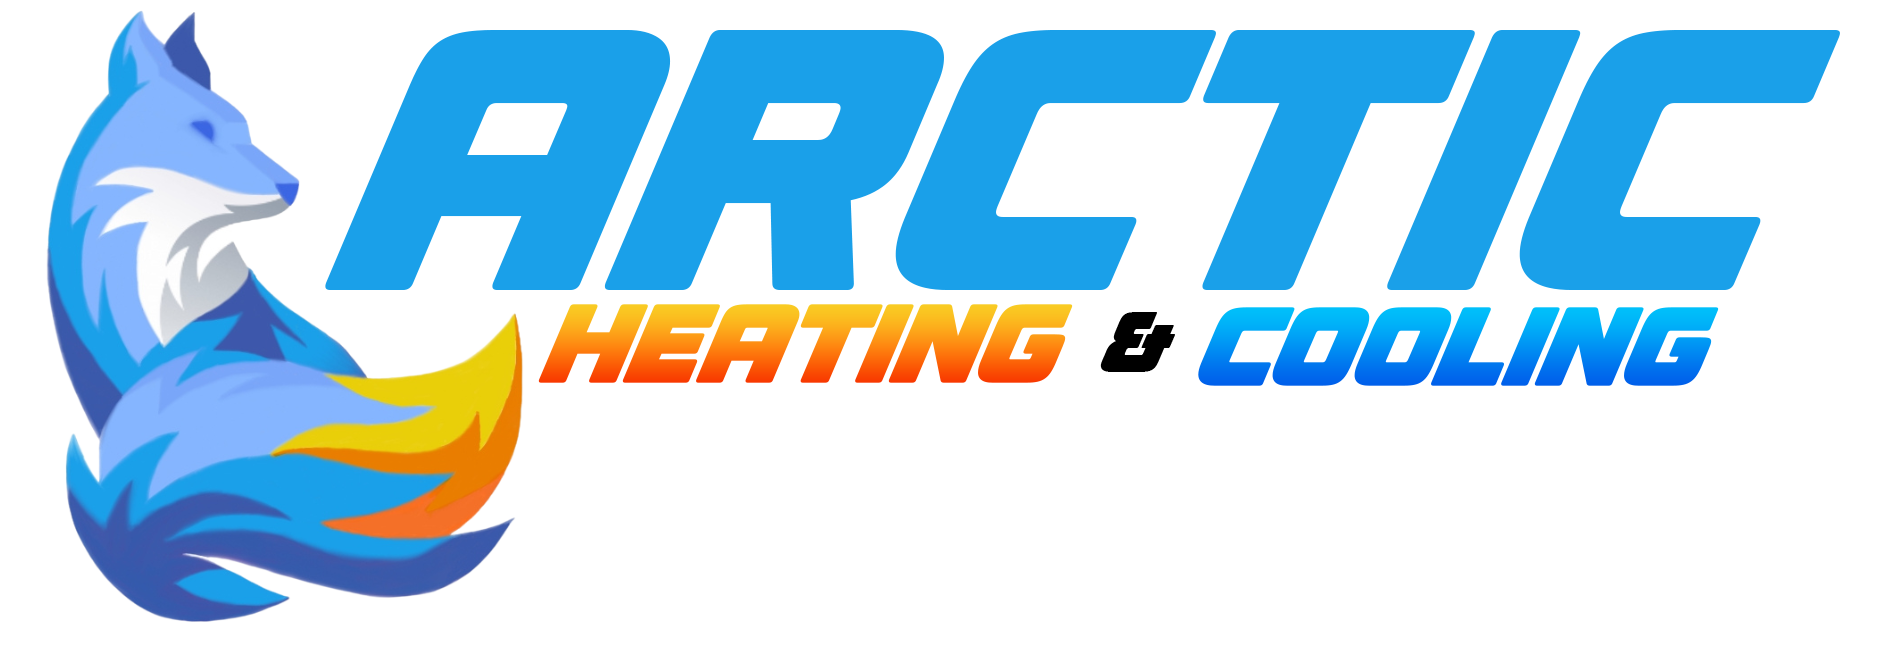 Arctic Heating and Cooling